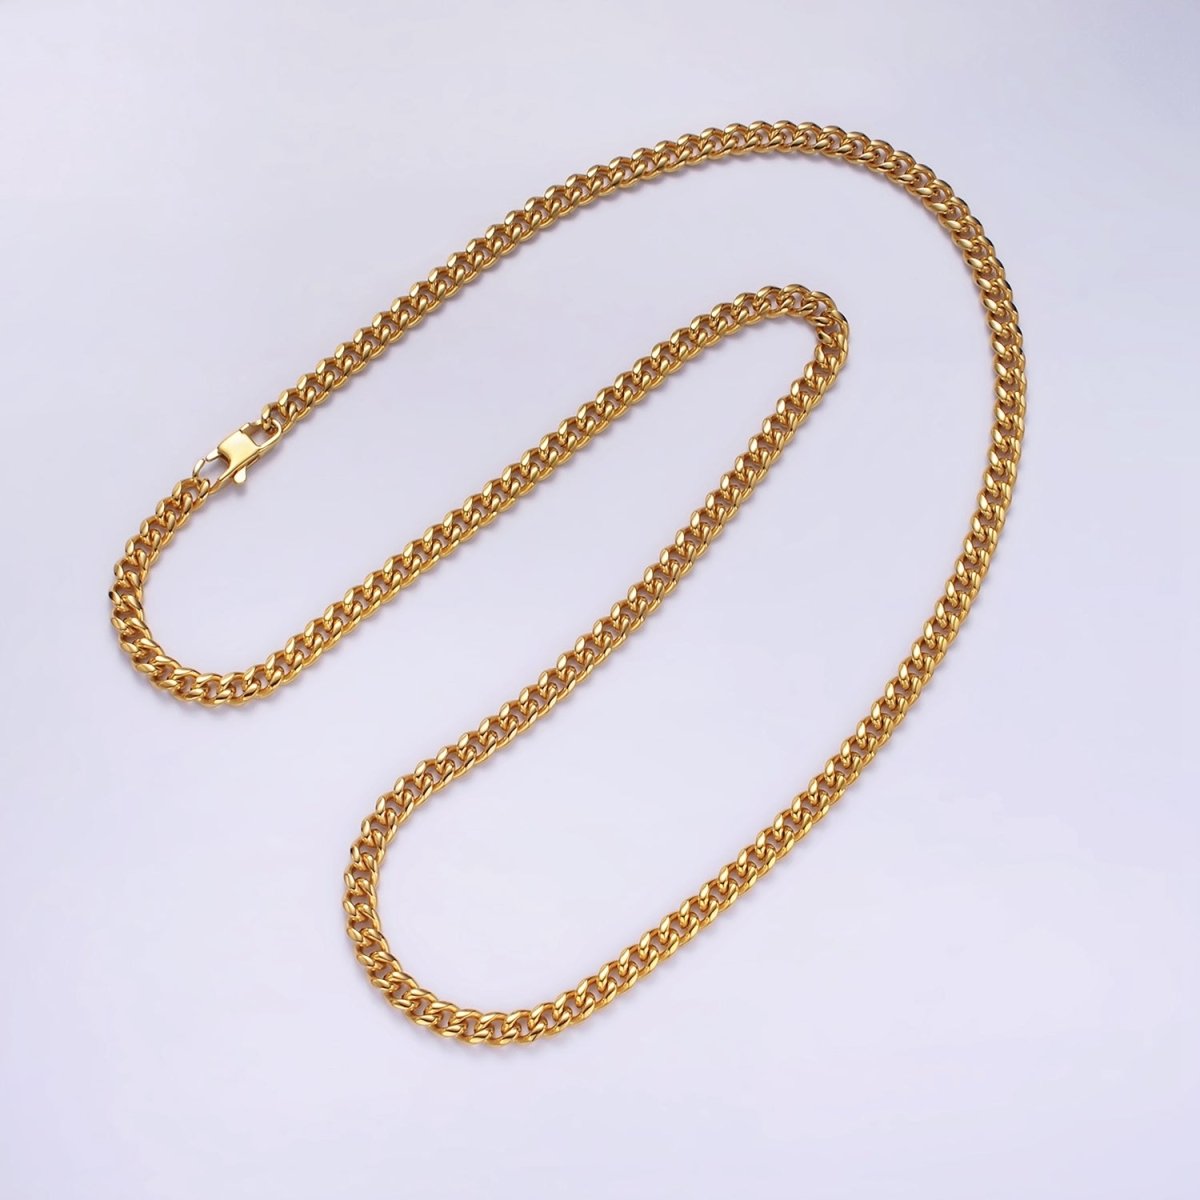 5mm Curb Chain Necklaces 21.6" or 23.6 " Chain , Lobster Clasp in Silver , Gold - Wholesale Stainless Steel Chains | WA2139 to WA2142 Clearance Pricing - DLUXCA